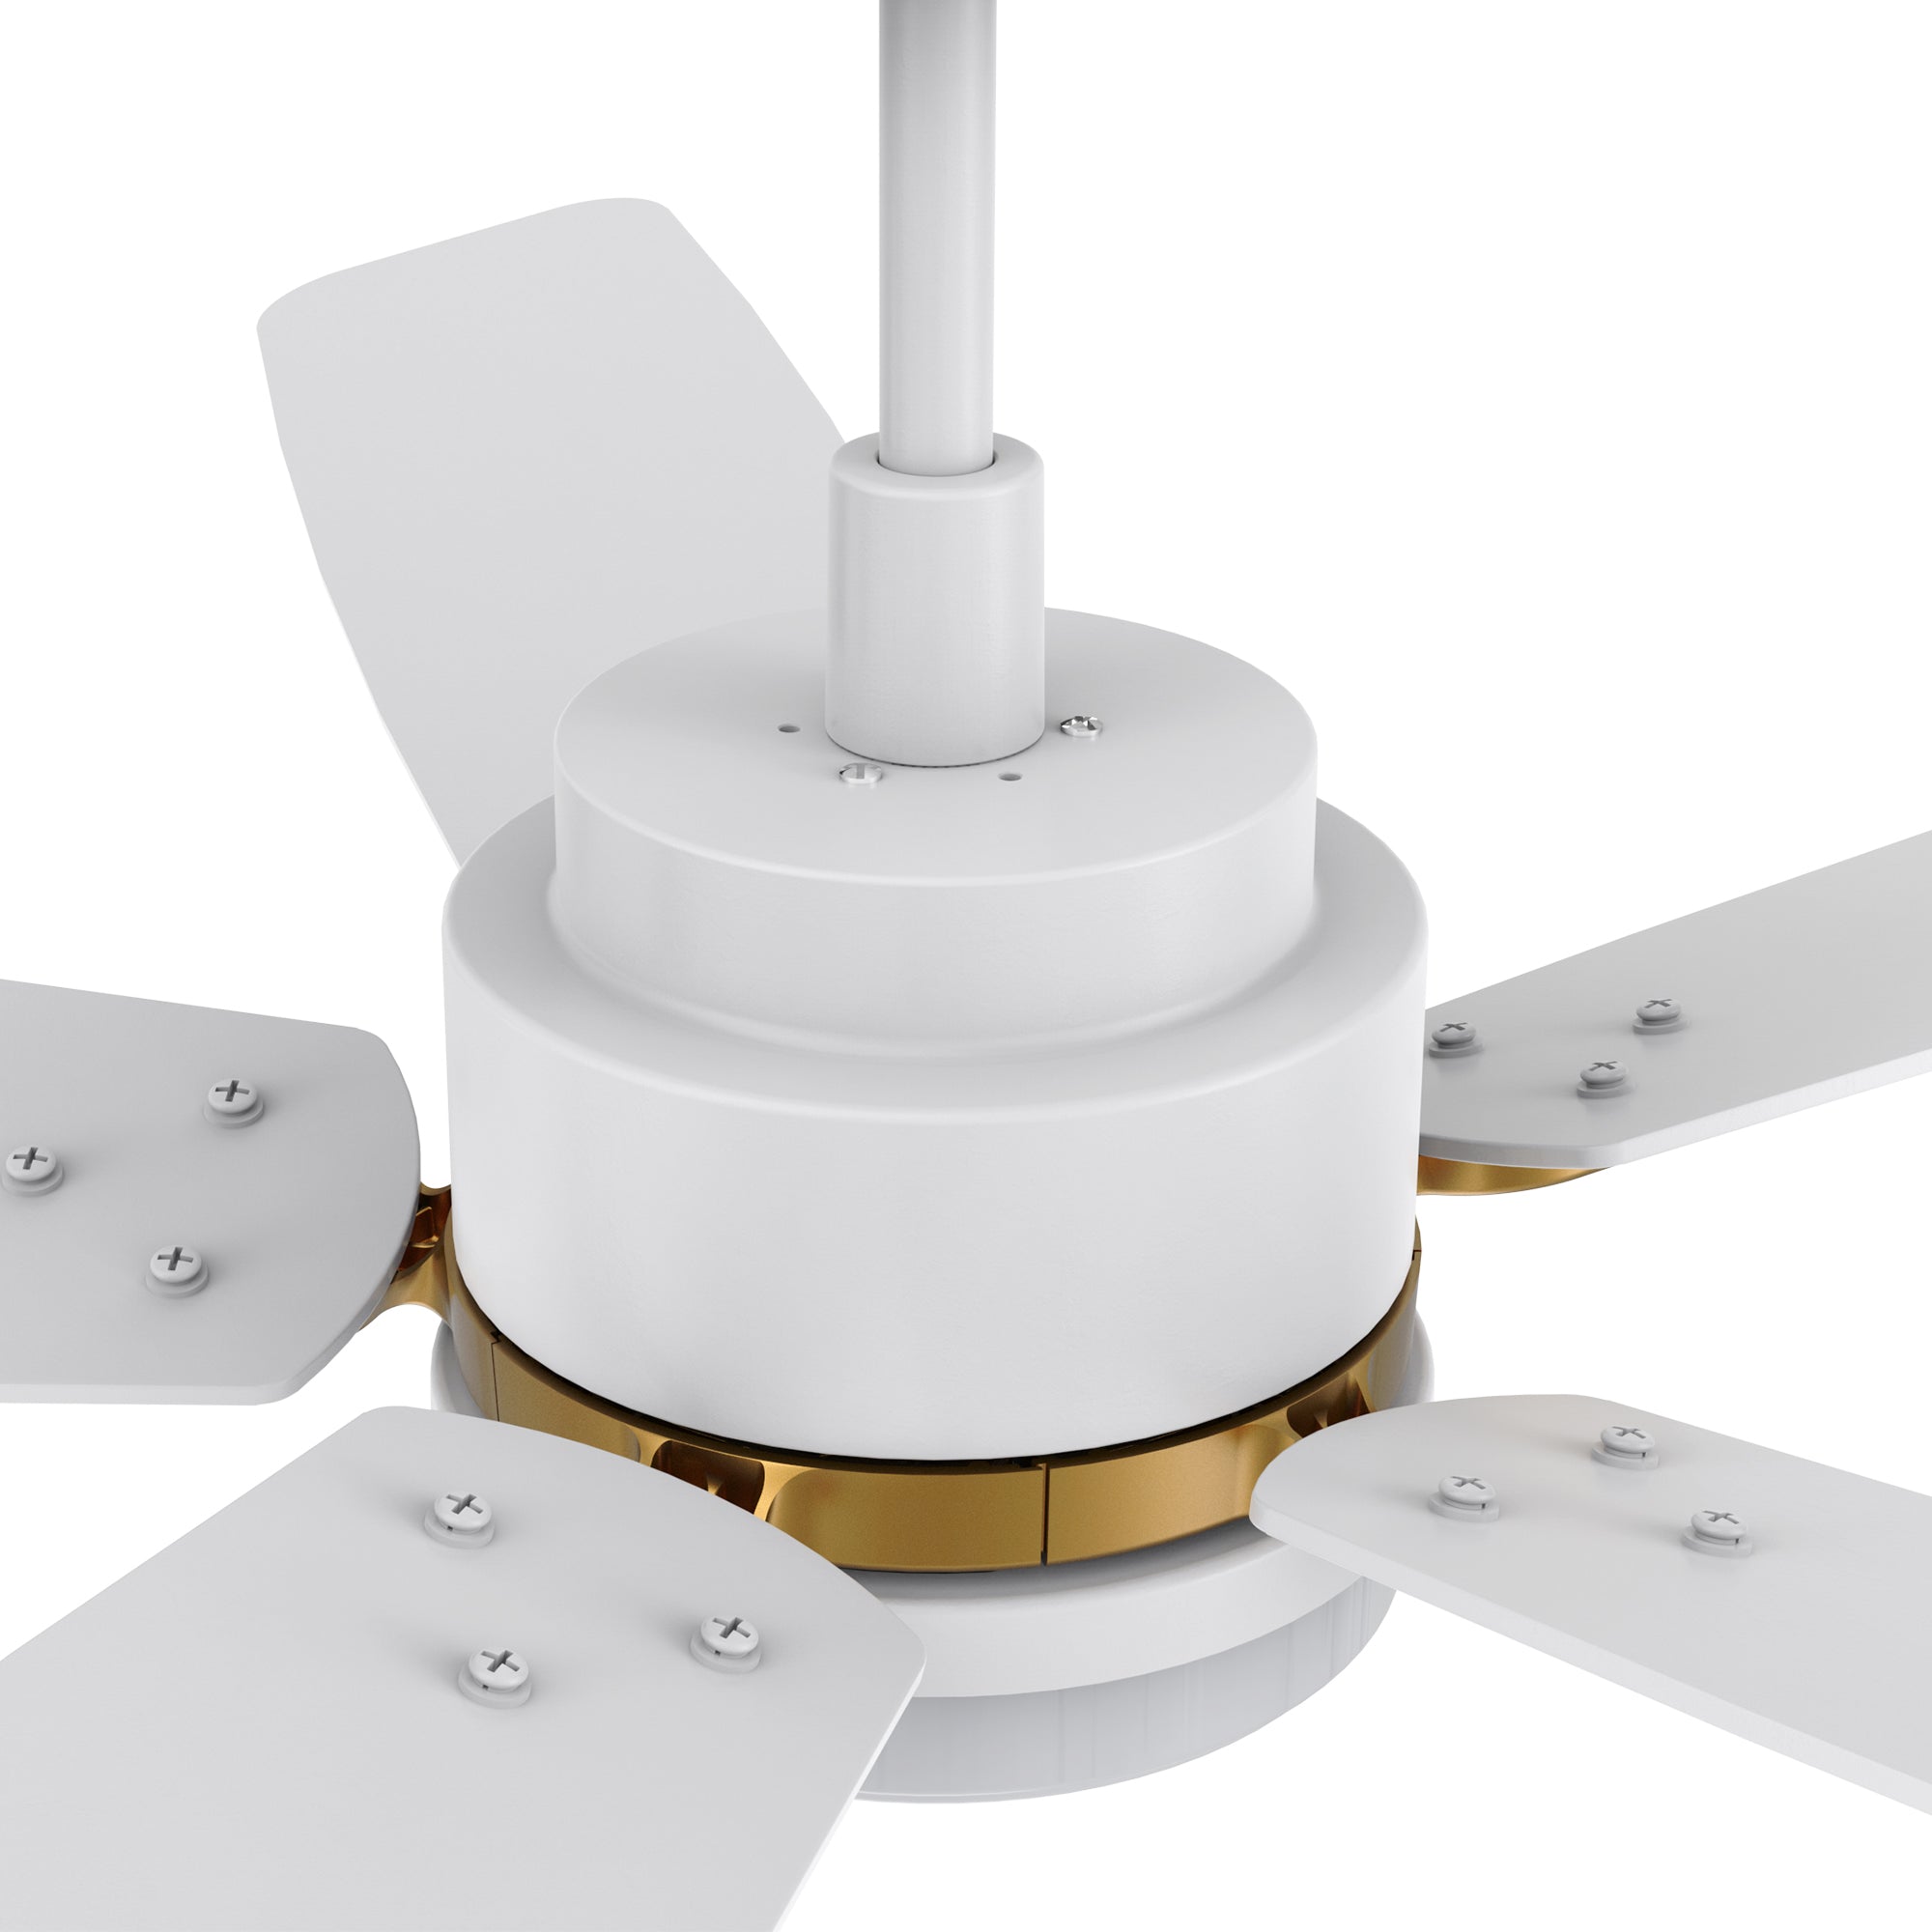 This Havre 52'' smart ceiling fan keeps your space cool, bright, and stylish. It is a soft modern masterpiece perfect for your large indoor living spaces. This Wifi smart ceiling fan is a simplicity designing with White finish, use elegant Plywood blades and has an integrated 4000K LED cool light. The fan features Remote control, Wi-Fi apps, Siri Shortcut and Voice control technology (compatible with Amazon Alexa and Google Home Assistant ) to set fan preferences.